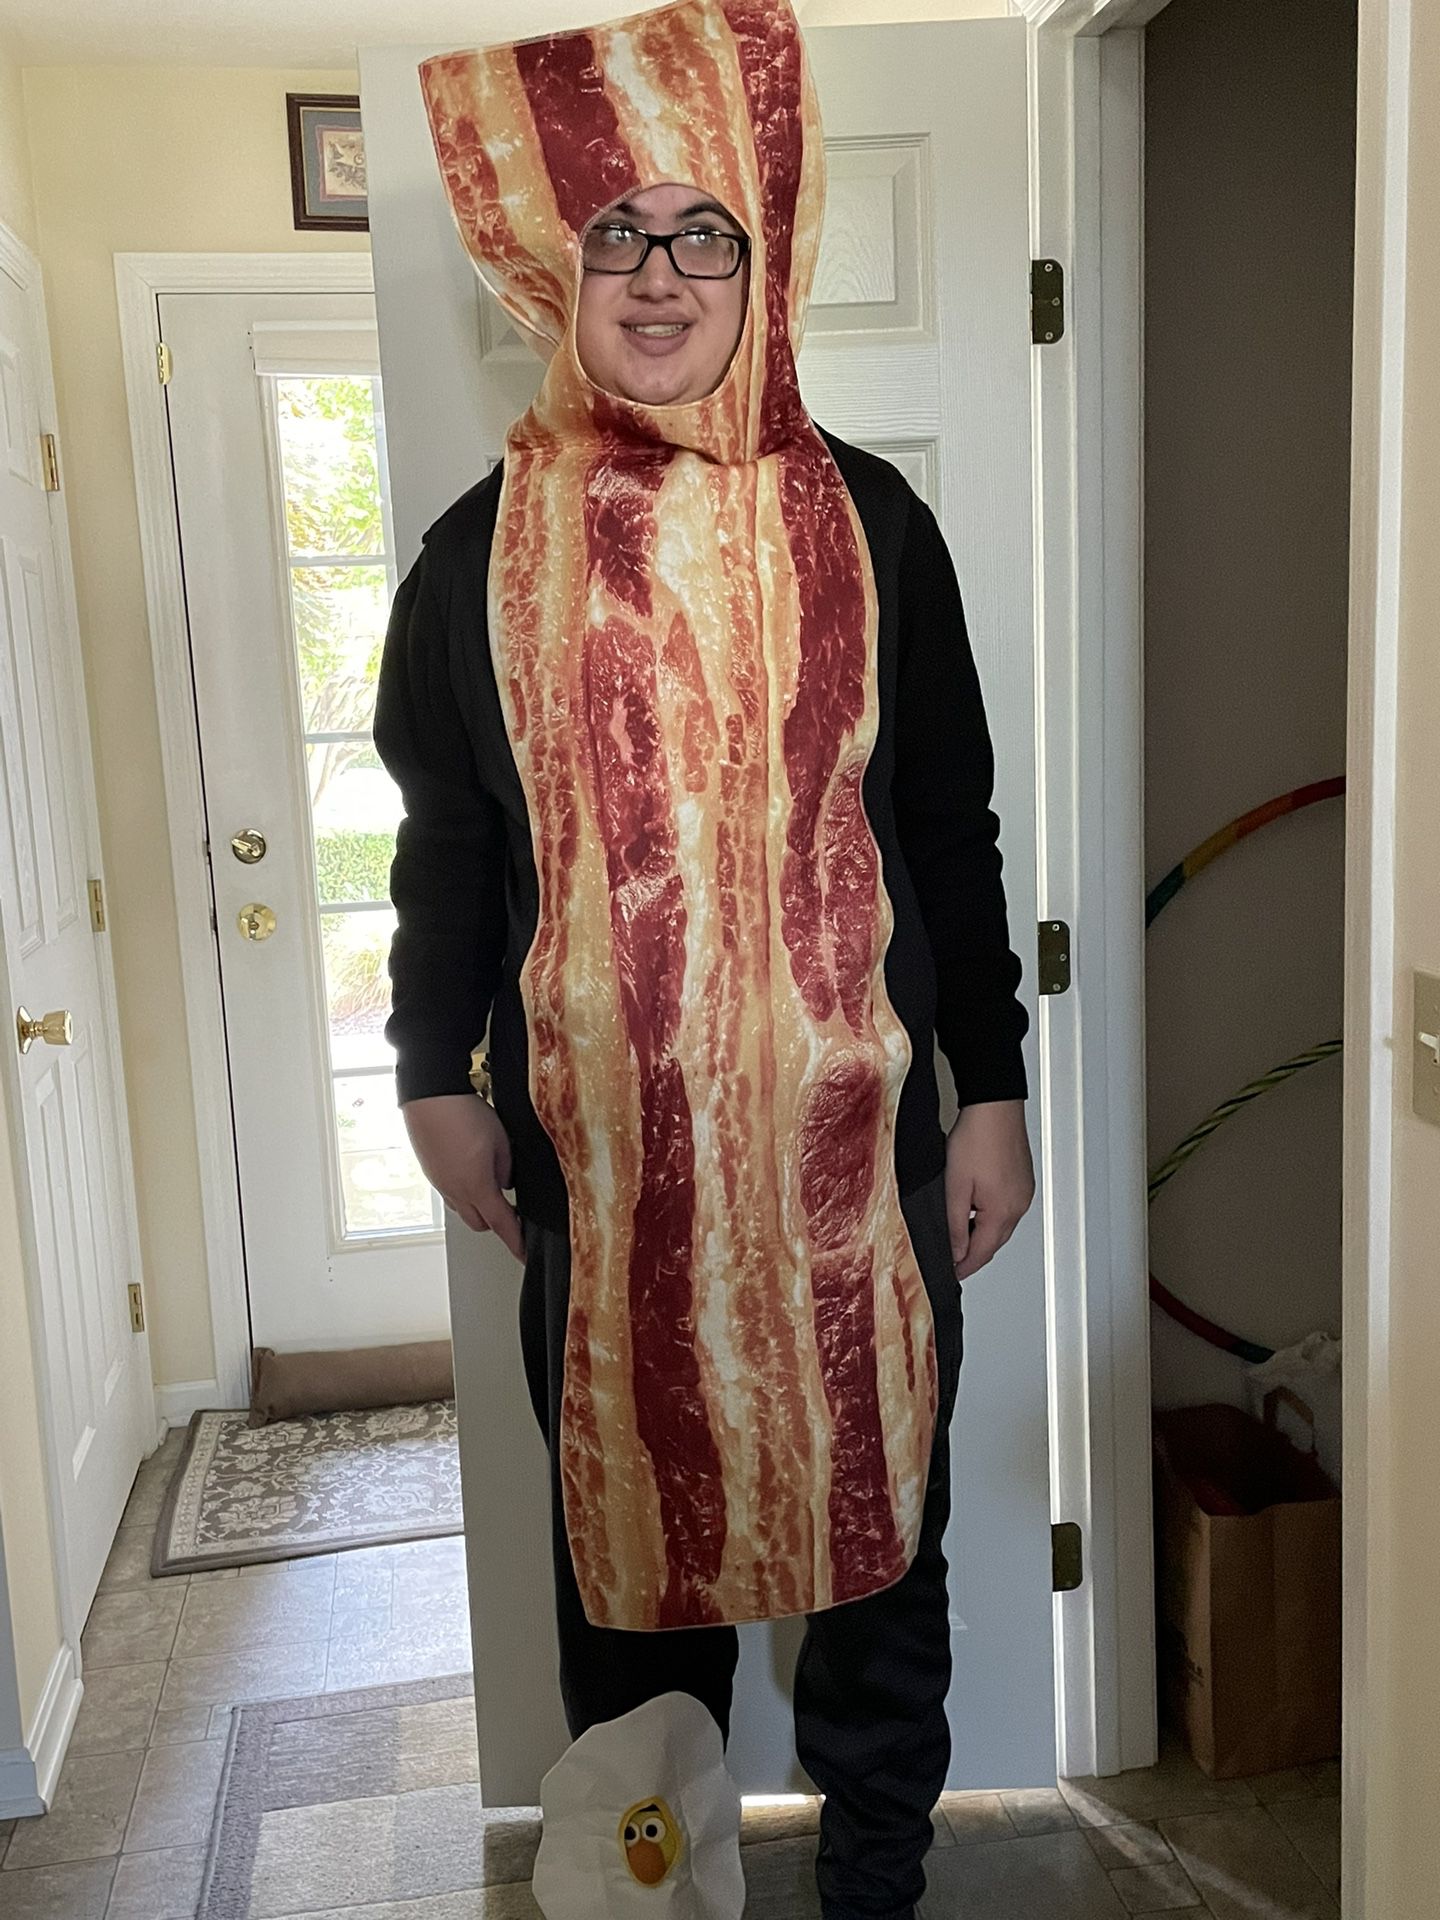 Adult Halloween Costume - BACON- One Size Fits ALL!